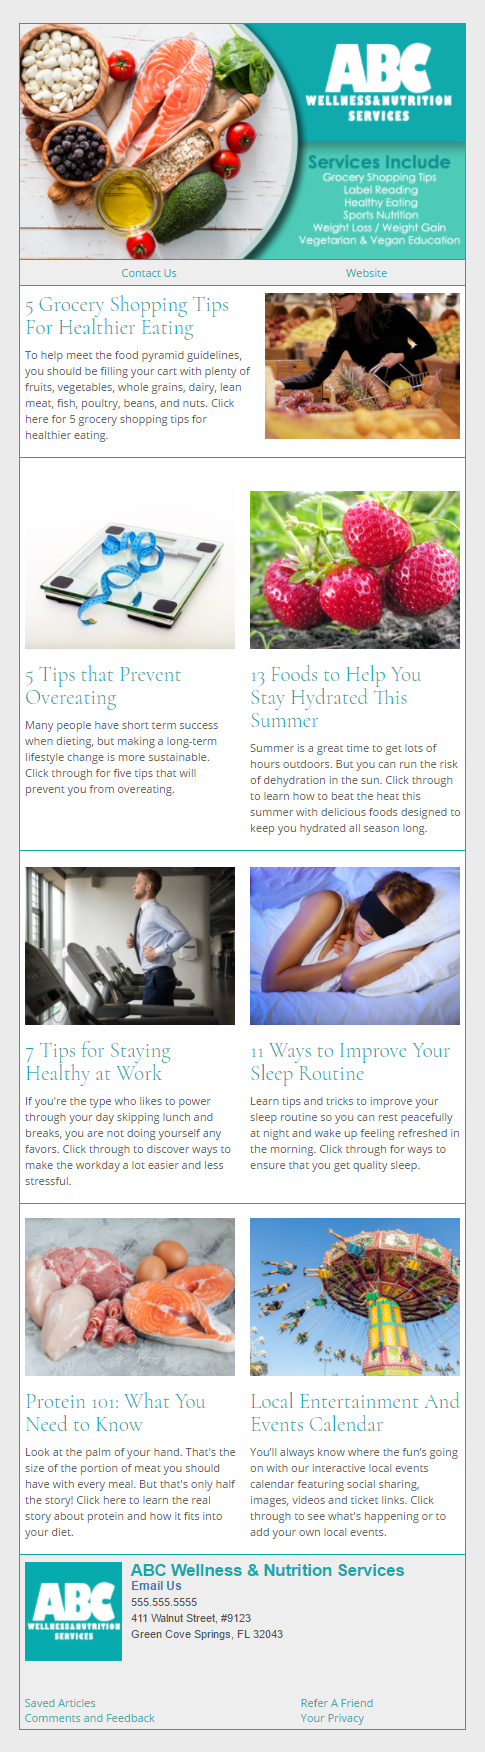 ABC Wellness & Nutrition Services health and wellness Email Newsletter Preview